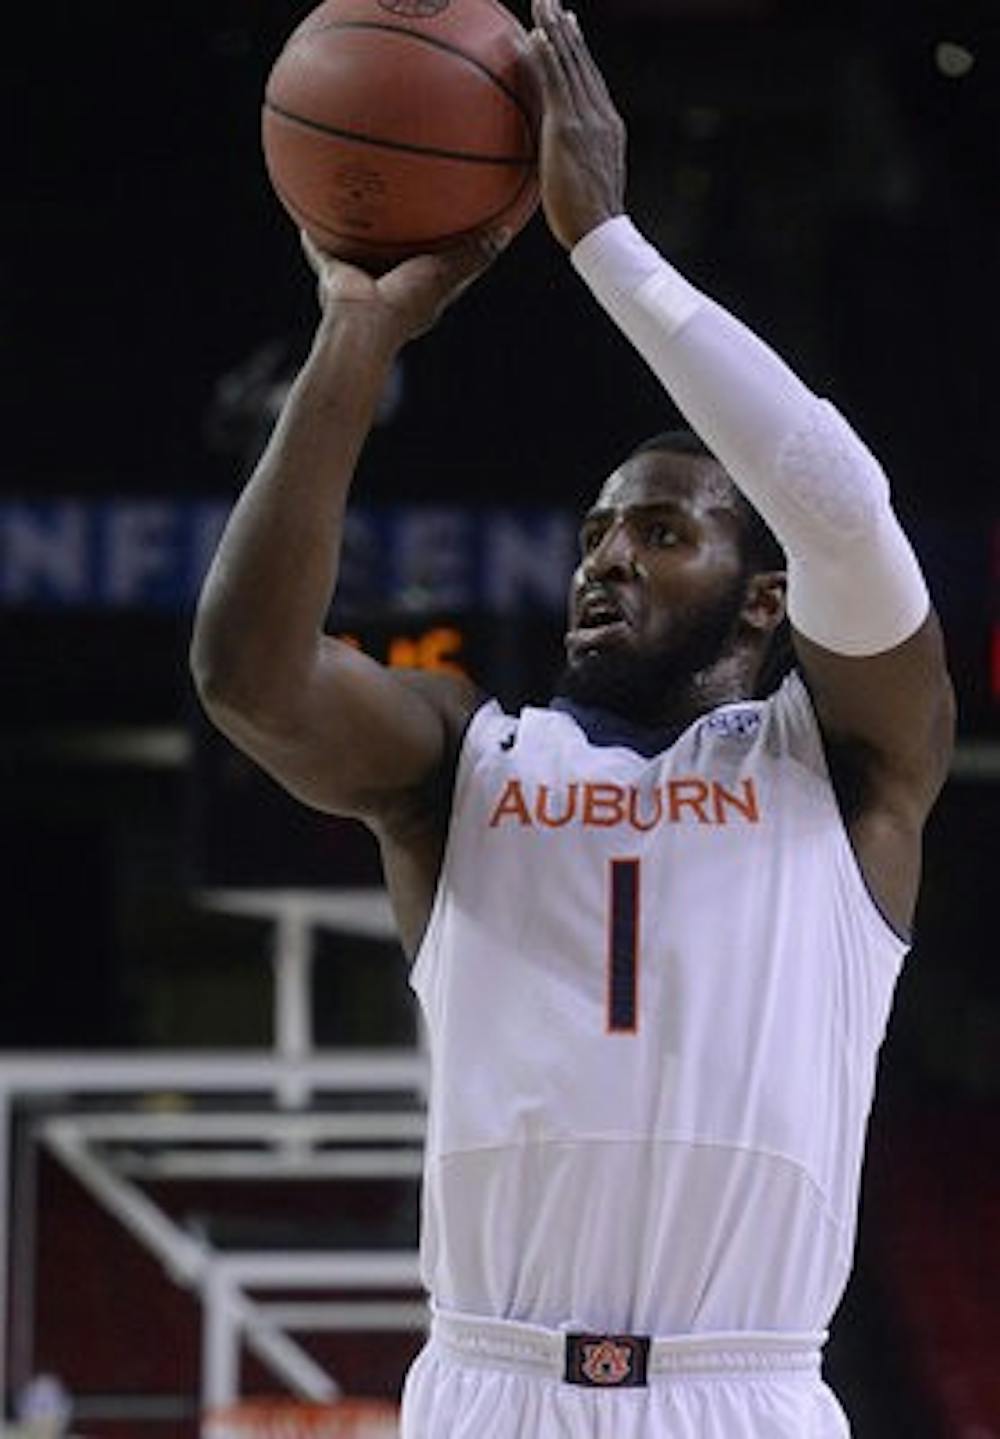 KT Harrell hits a 3-pointer for Auburn in the Tigers' SEC Tournament game against South Carolina. (Contributed by Lauren Barnard)